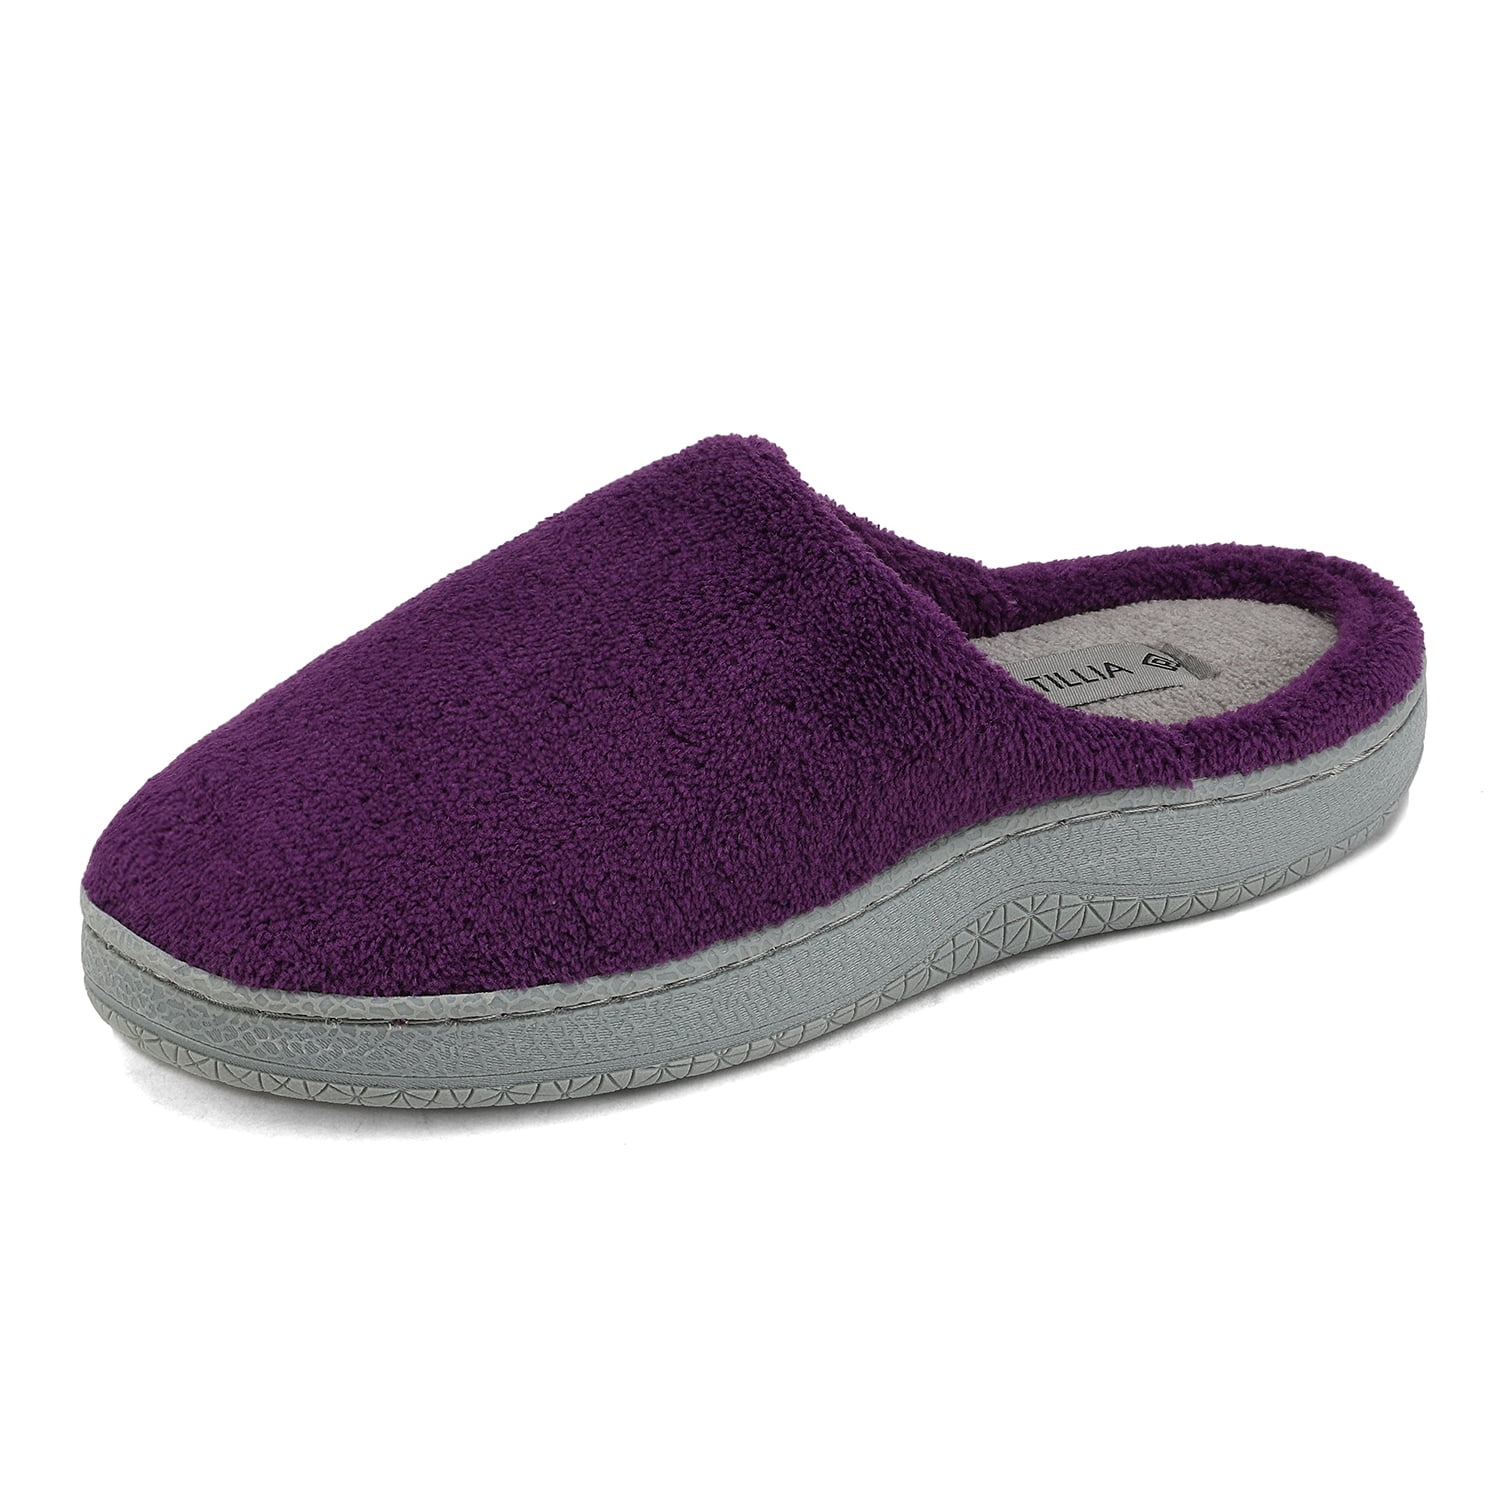 Moonbeams Purple Quilted Moccasin Slippers for Women Soft Fuzzy Micro Terry 